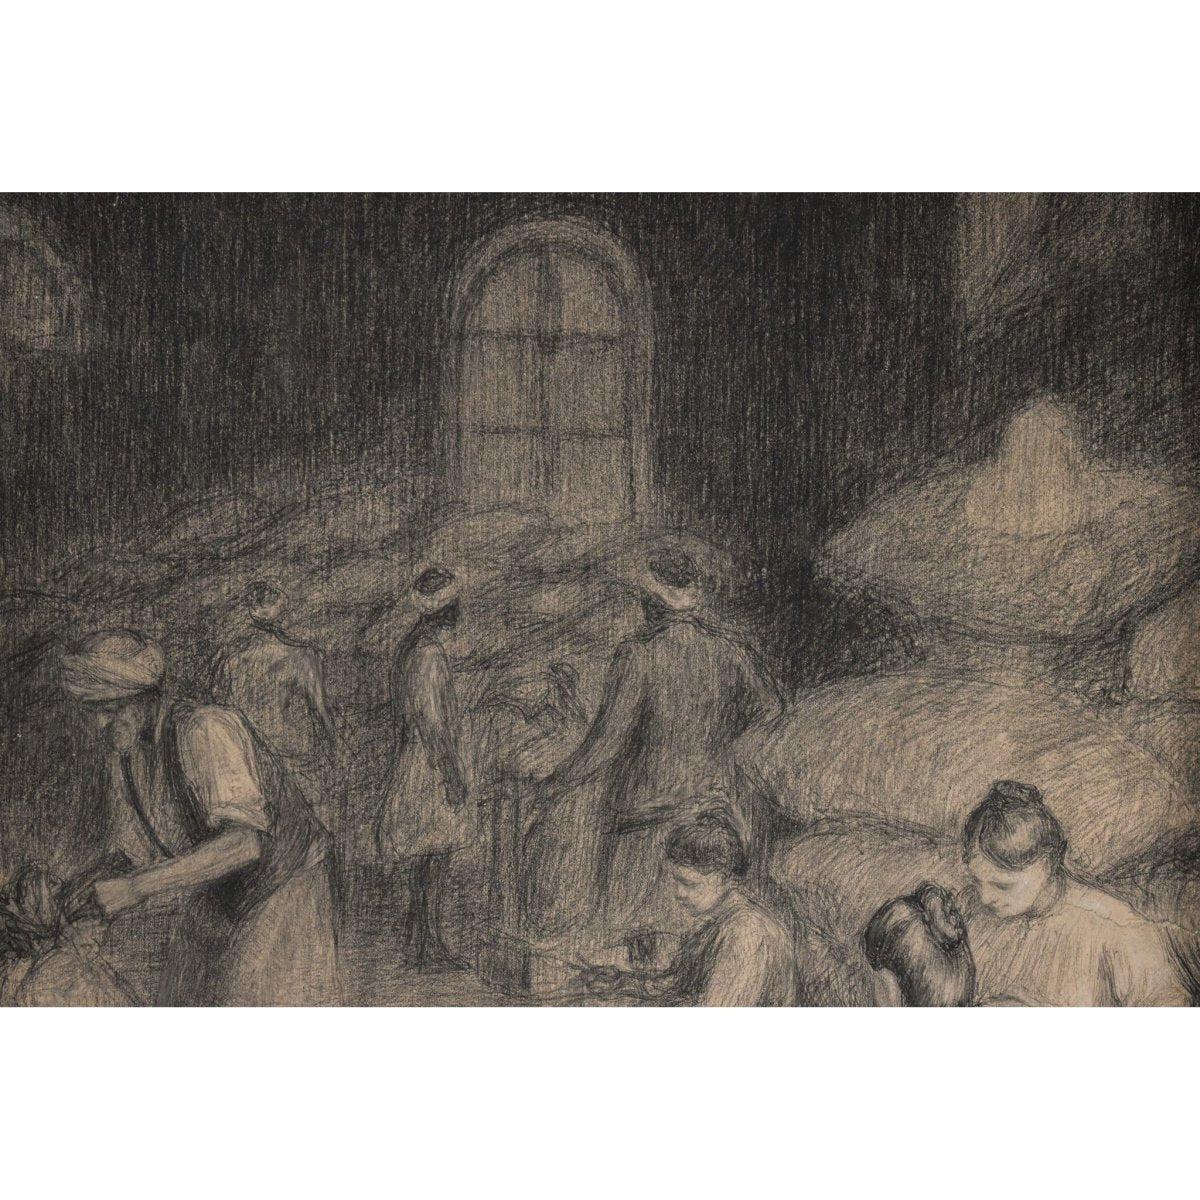 Antique scene drawing painting workers warehouse circa 1910 by Edouard Pannetier for sale at Winckelmann Gallery